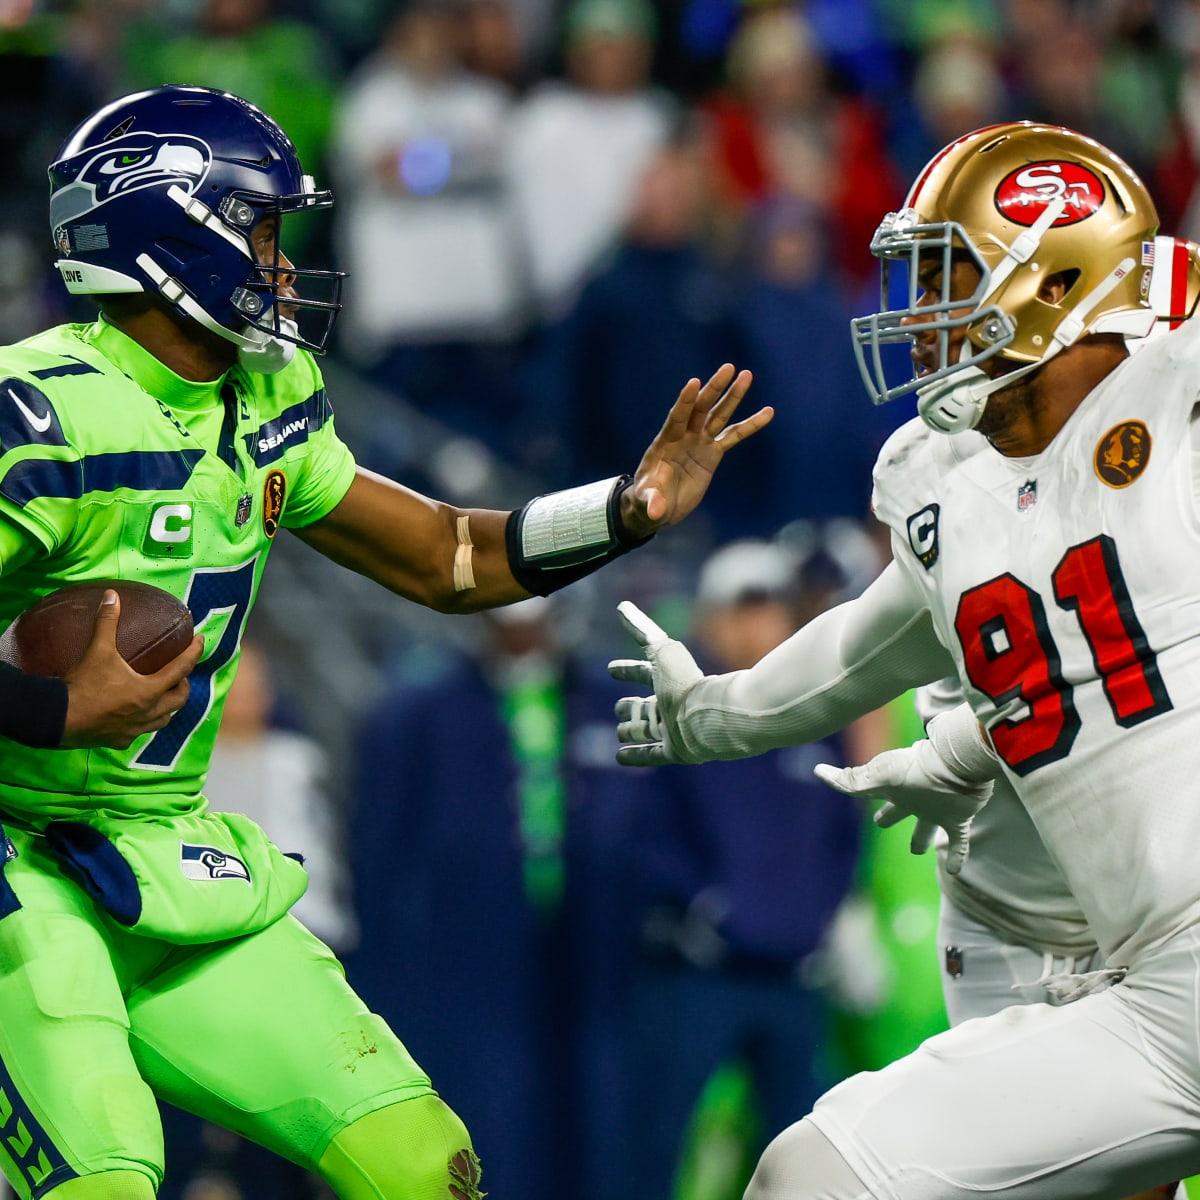 The 'sloppy' 49ers still demoralized the Seahawks. That's a clear